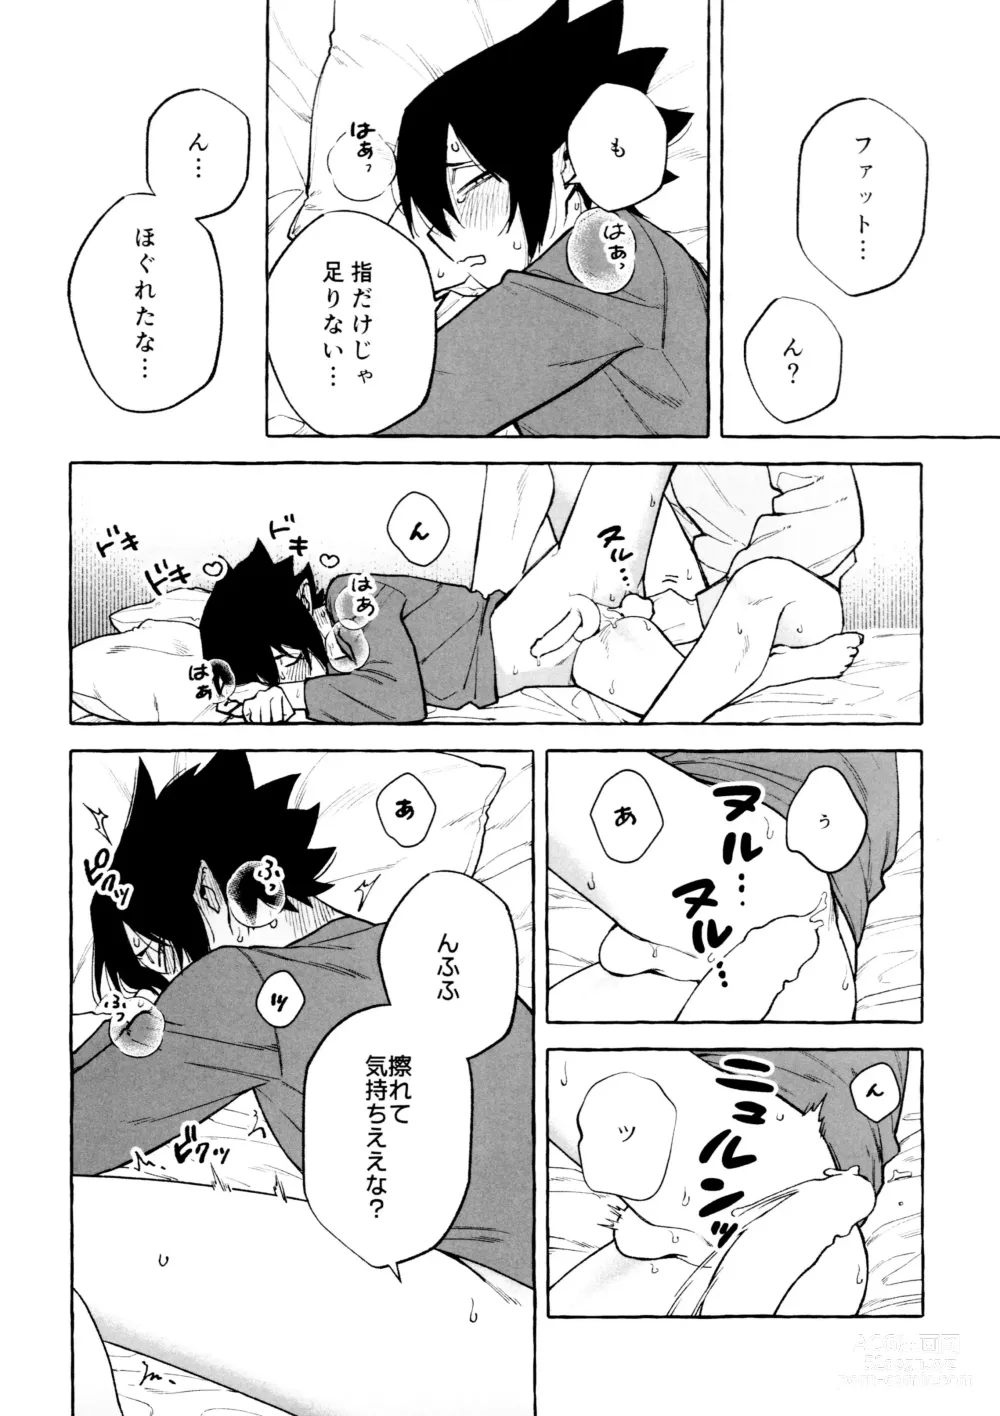 Page 10 of doujinshi Please please